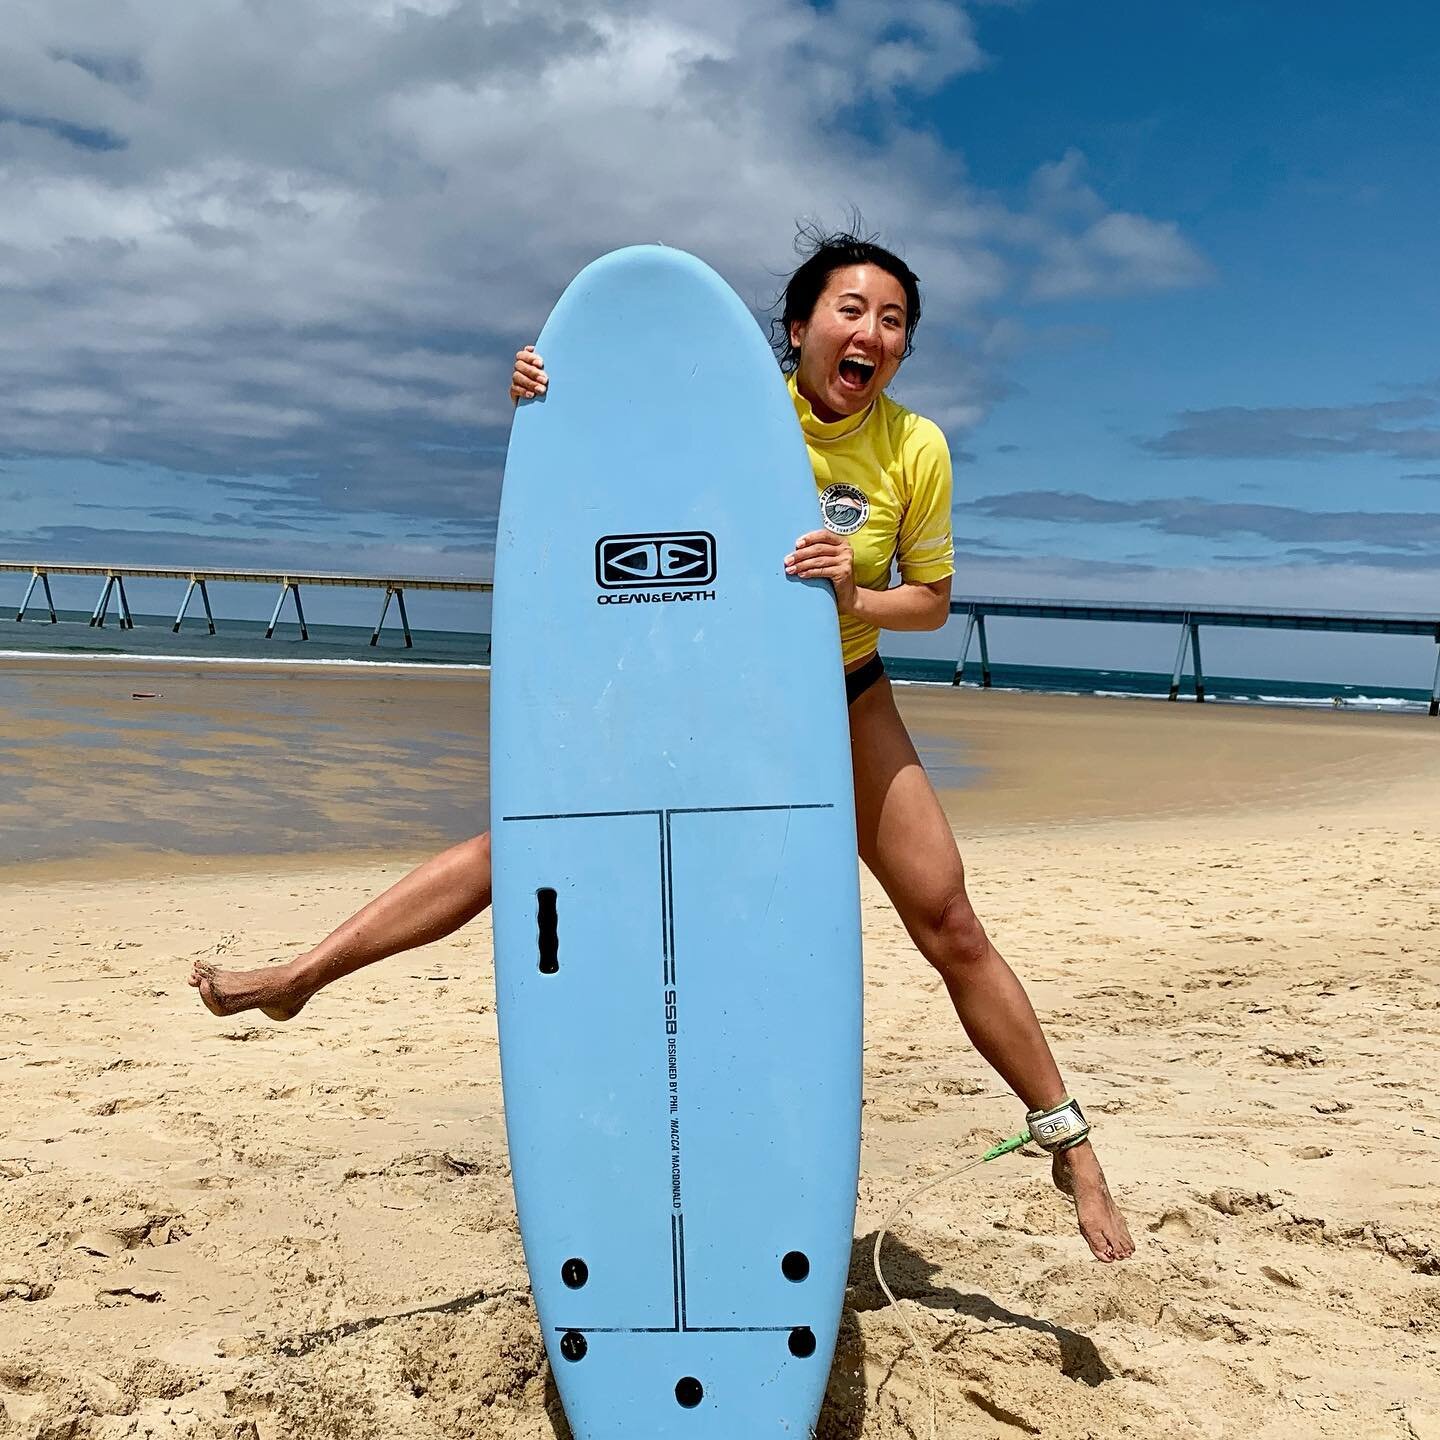 So, did you manage to give yourself the holidays you needed?

As for me, I needed time with my family and a bit of adventure.
So, thanks to my amazing sister, I tried surfing for the first time.
And to my surprise, I absolutely loved it 🤩!

As in yo